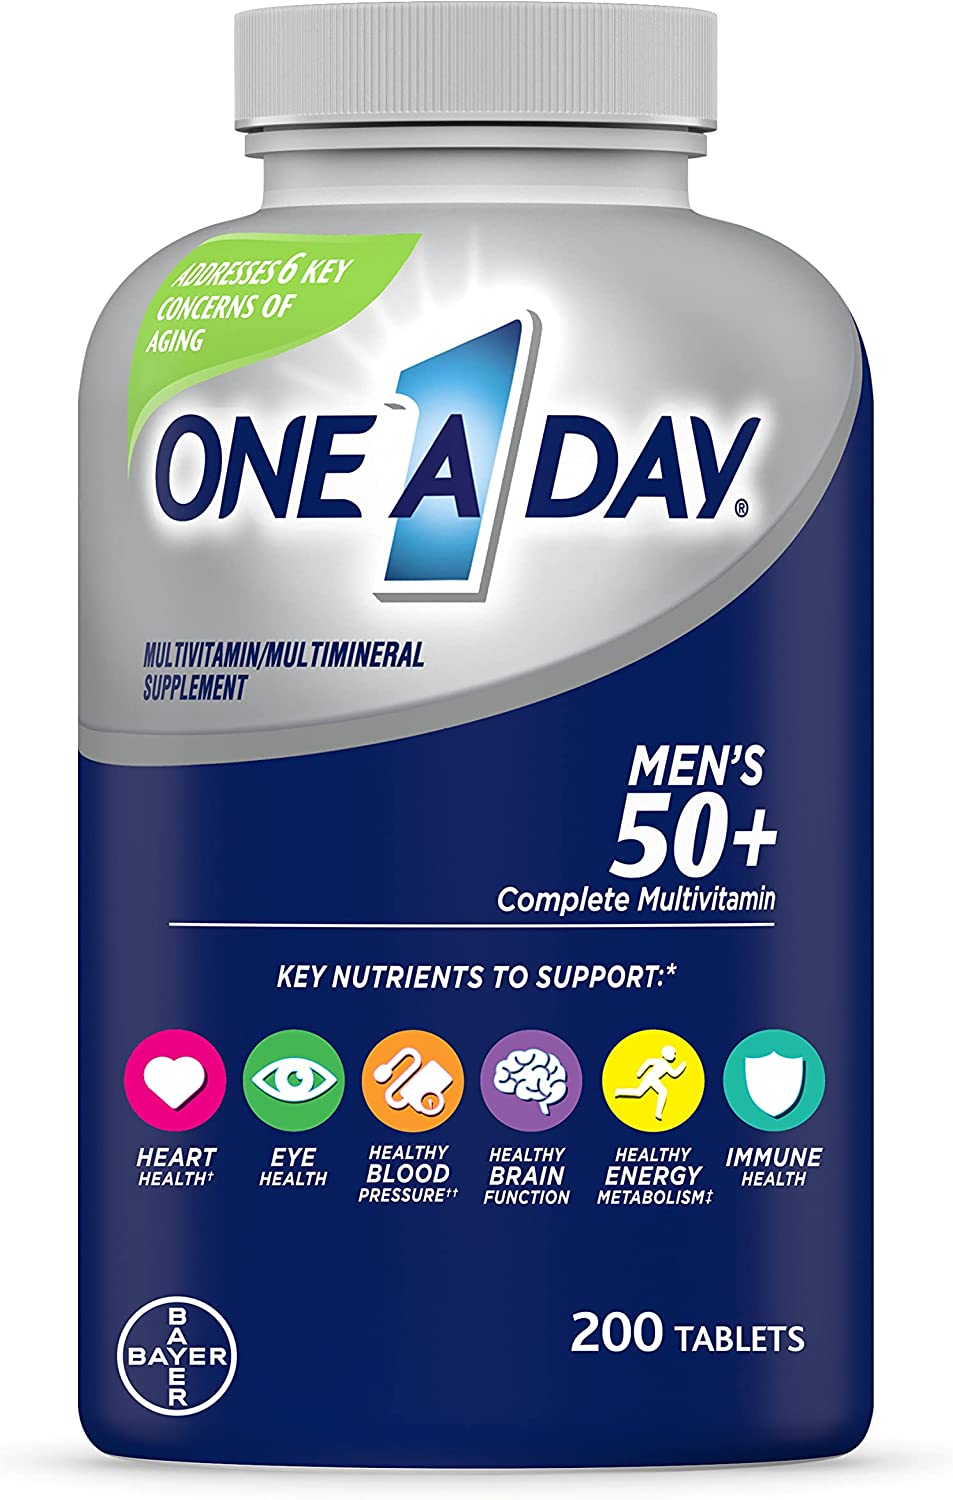 One A Day Men’s 50+ Healthy Advantage Multivitamin, Multivitamin for Men with Vitamins A, C, E, B6, B12, Calcium and Vitamin D, Tablet